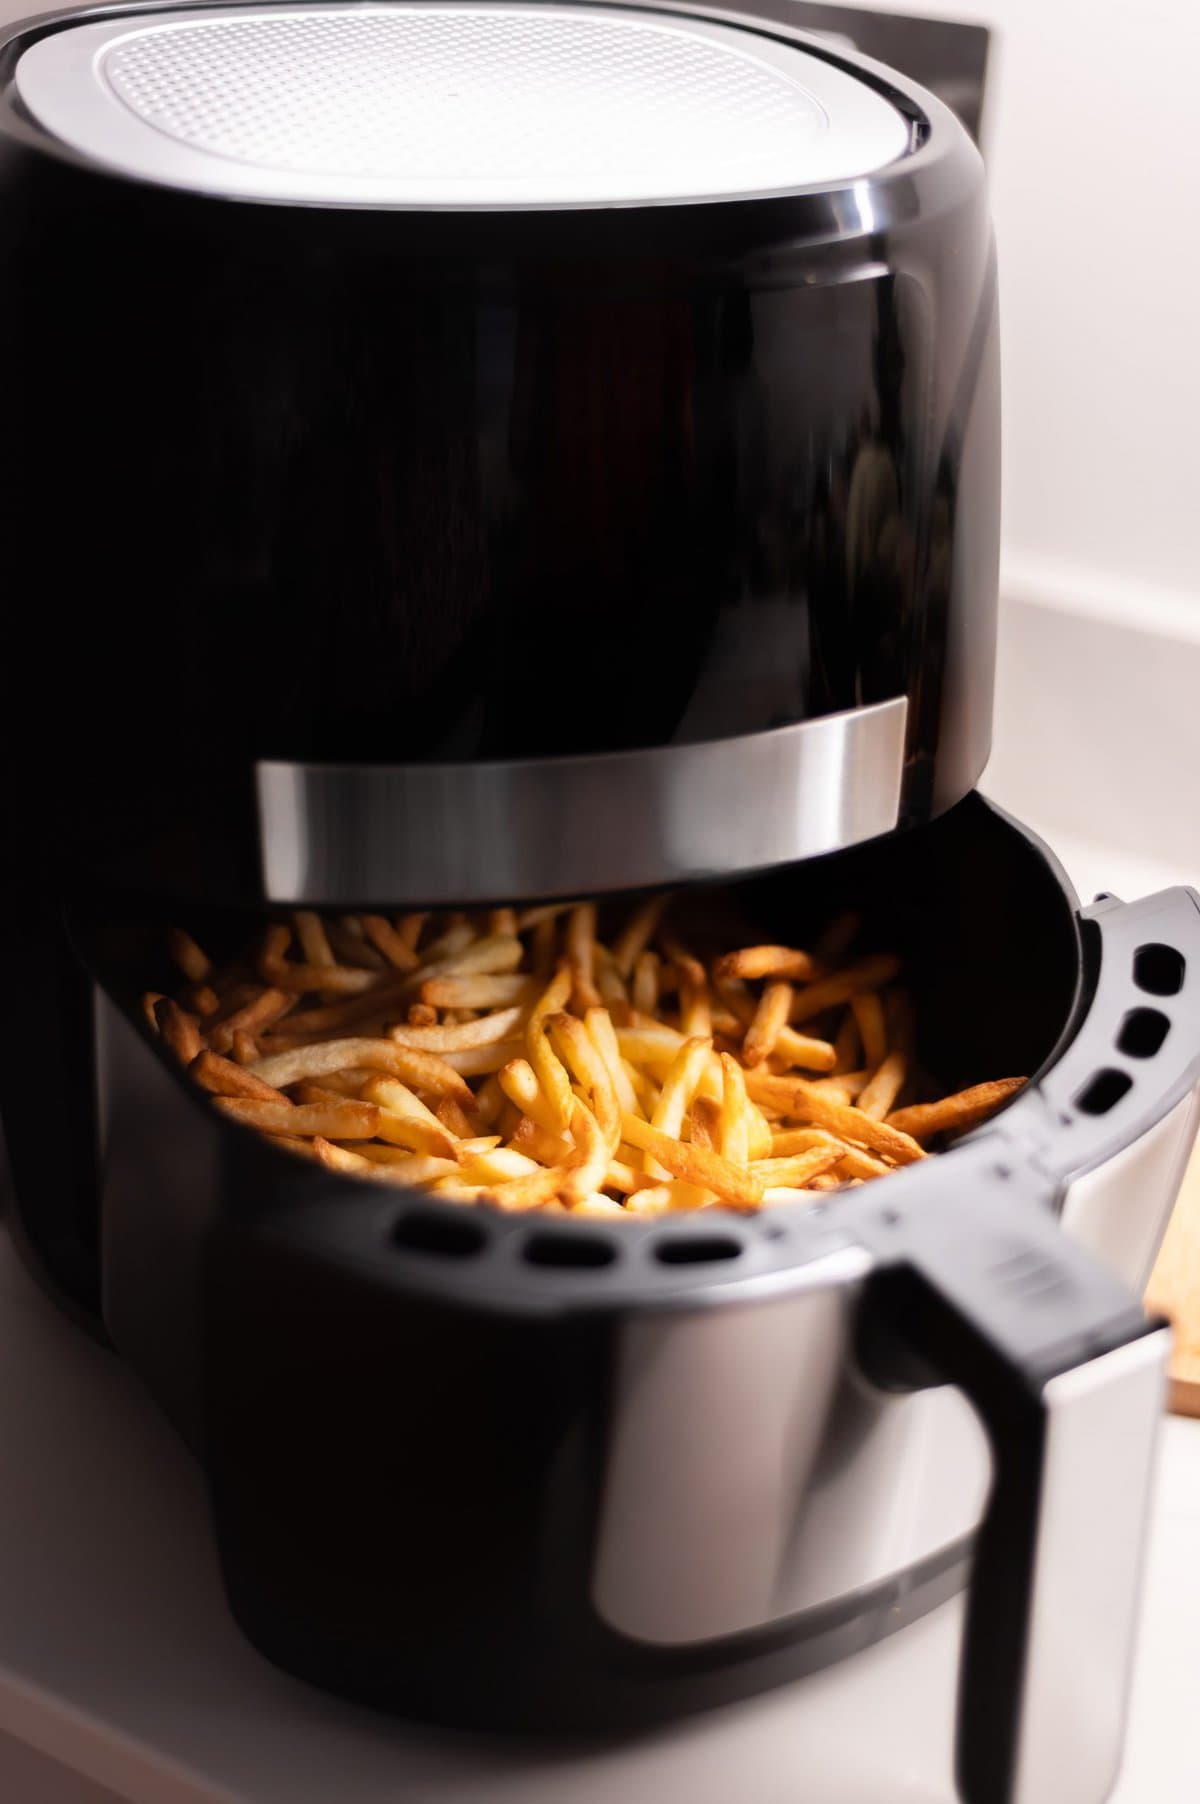 Best Oils for Air Frying Healthy Air Fried Foods? A GUIDE